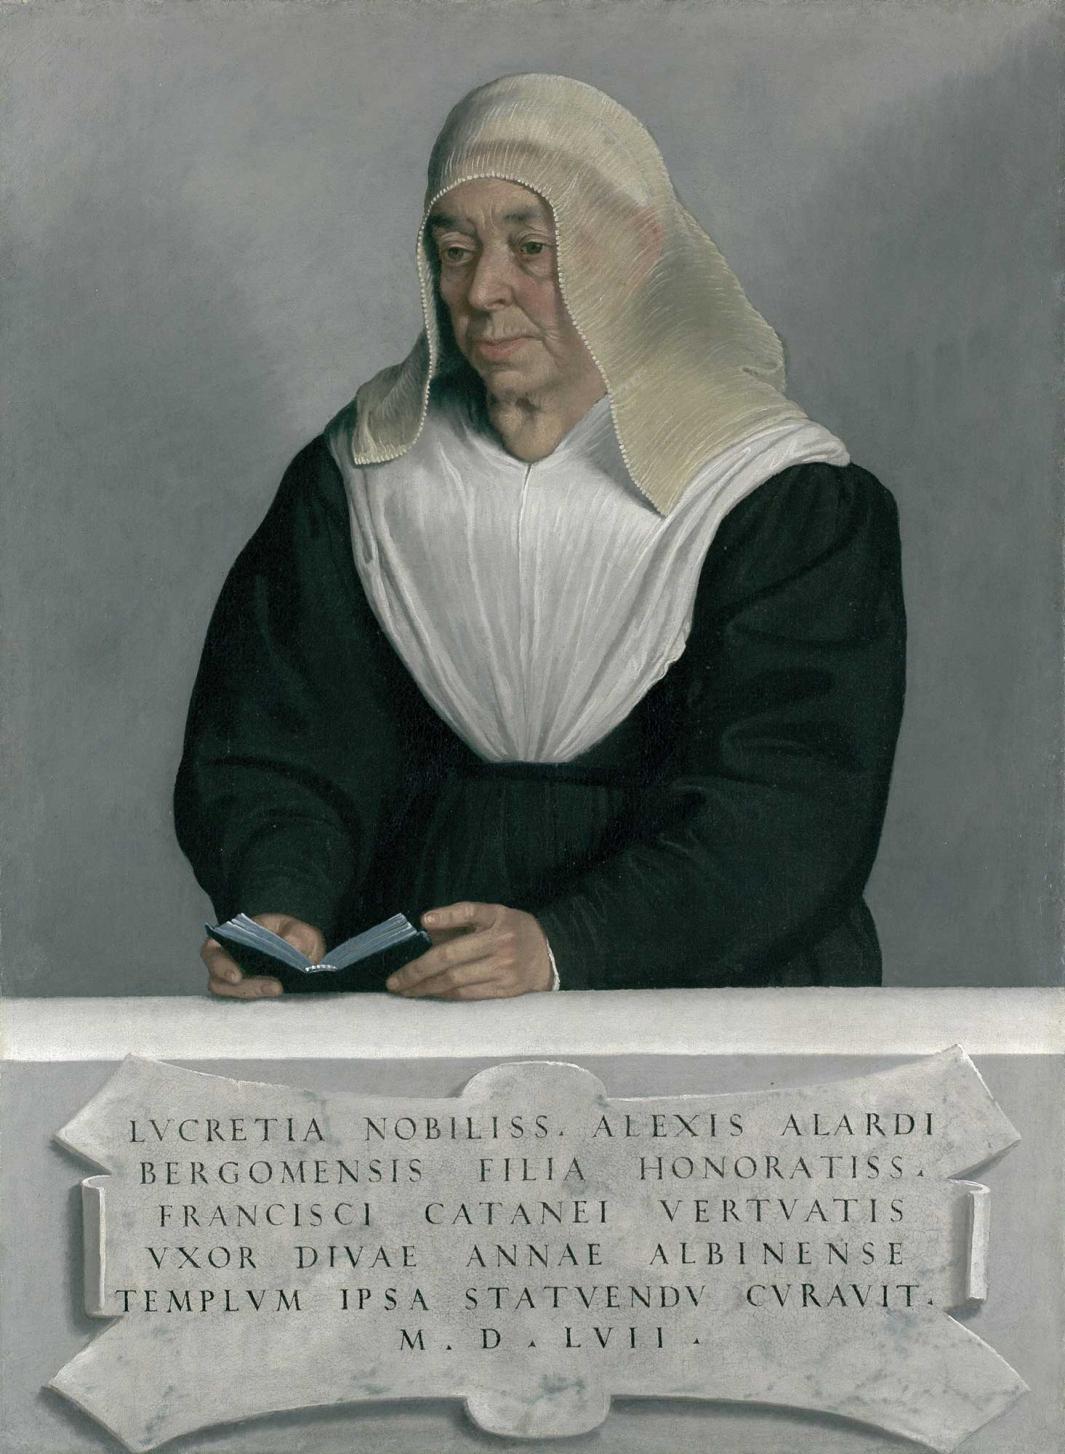 oil painting of an elderly woman, dressed in black, and wearing a white veil standing behind a stone parapet